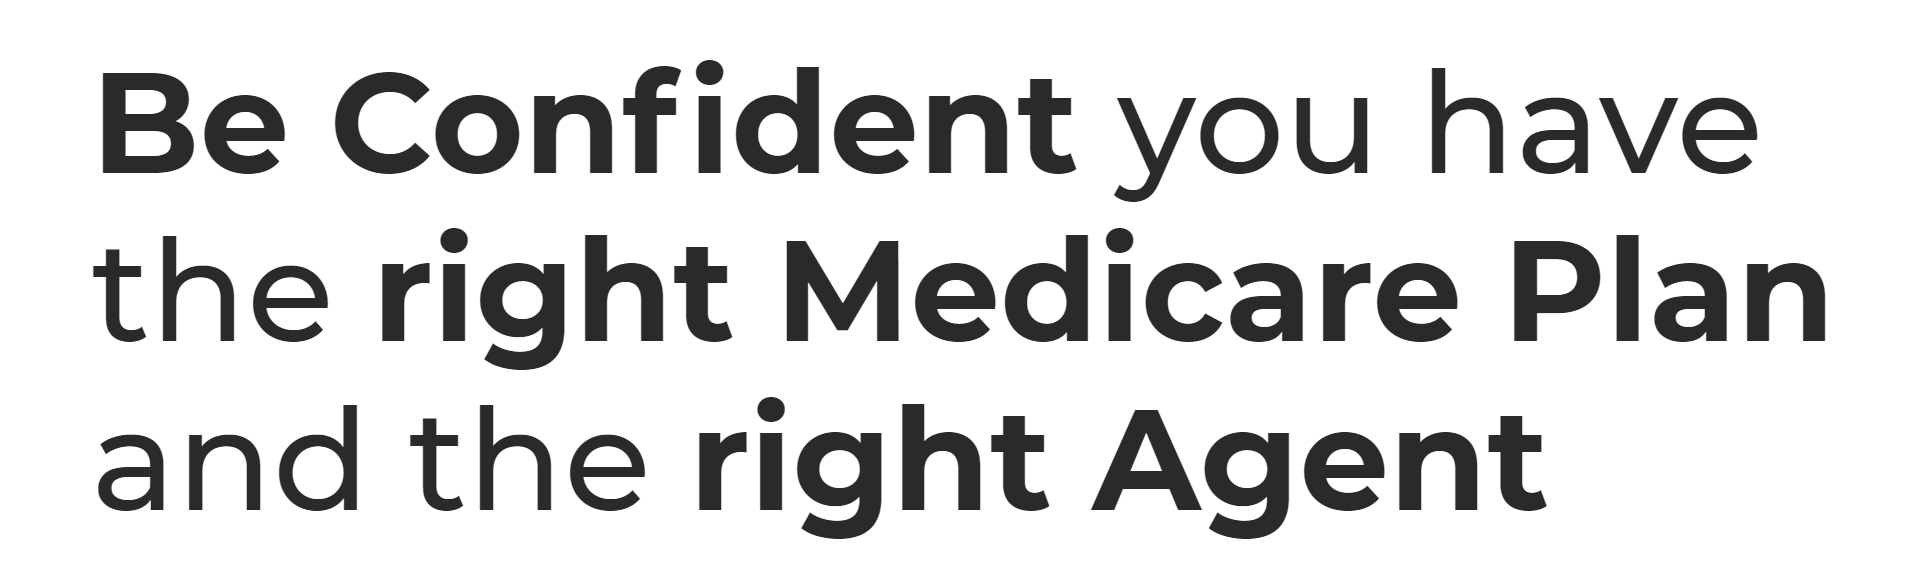 Be Confident you have the right Medicare Plan and the right Agent